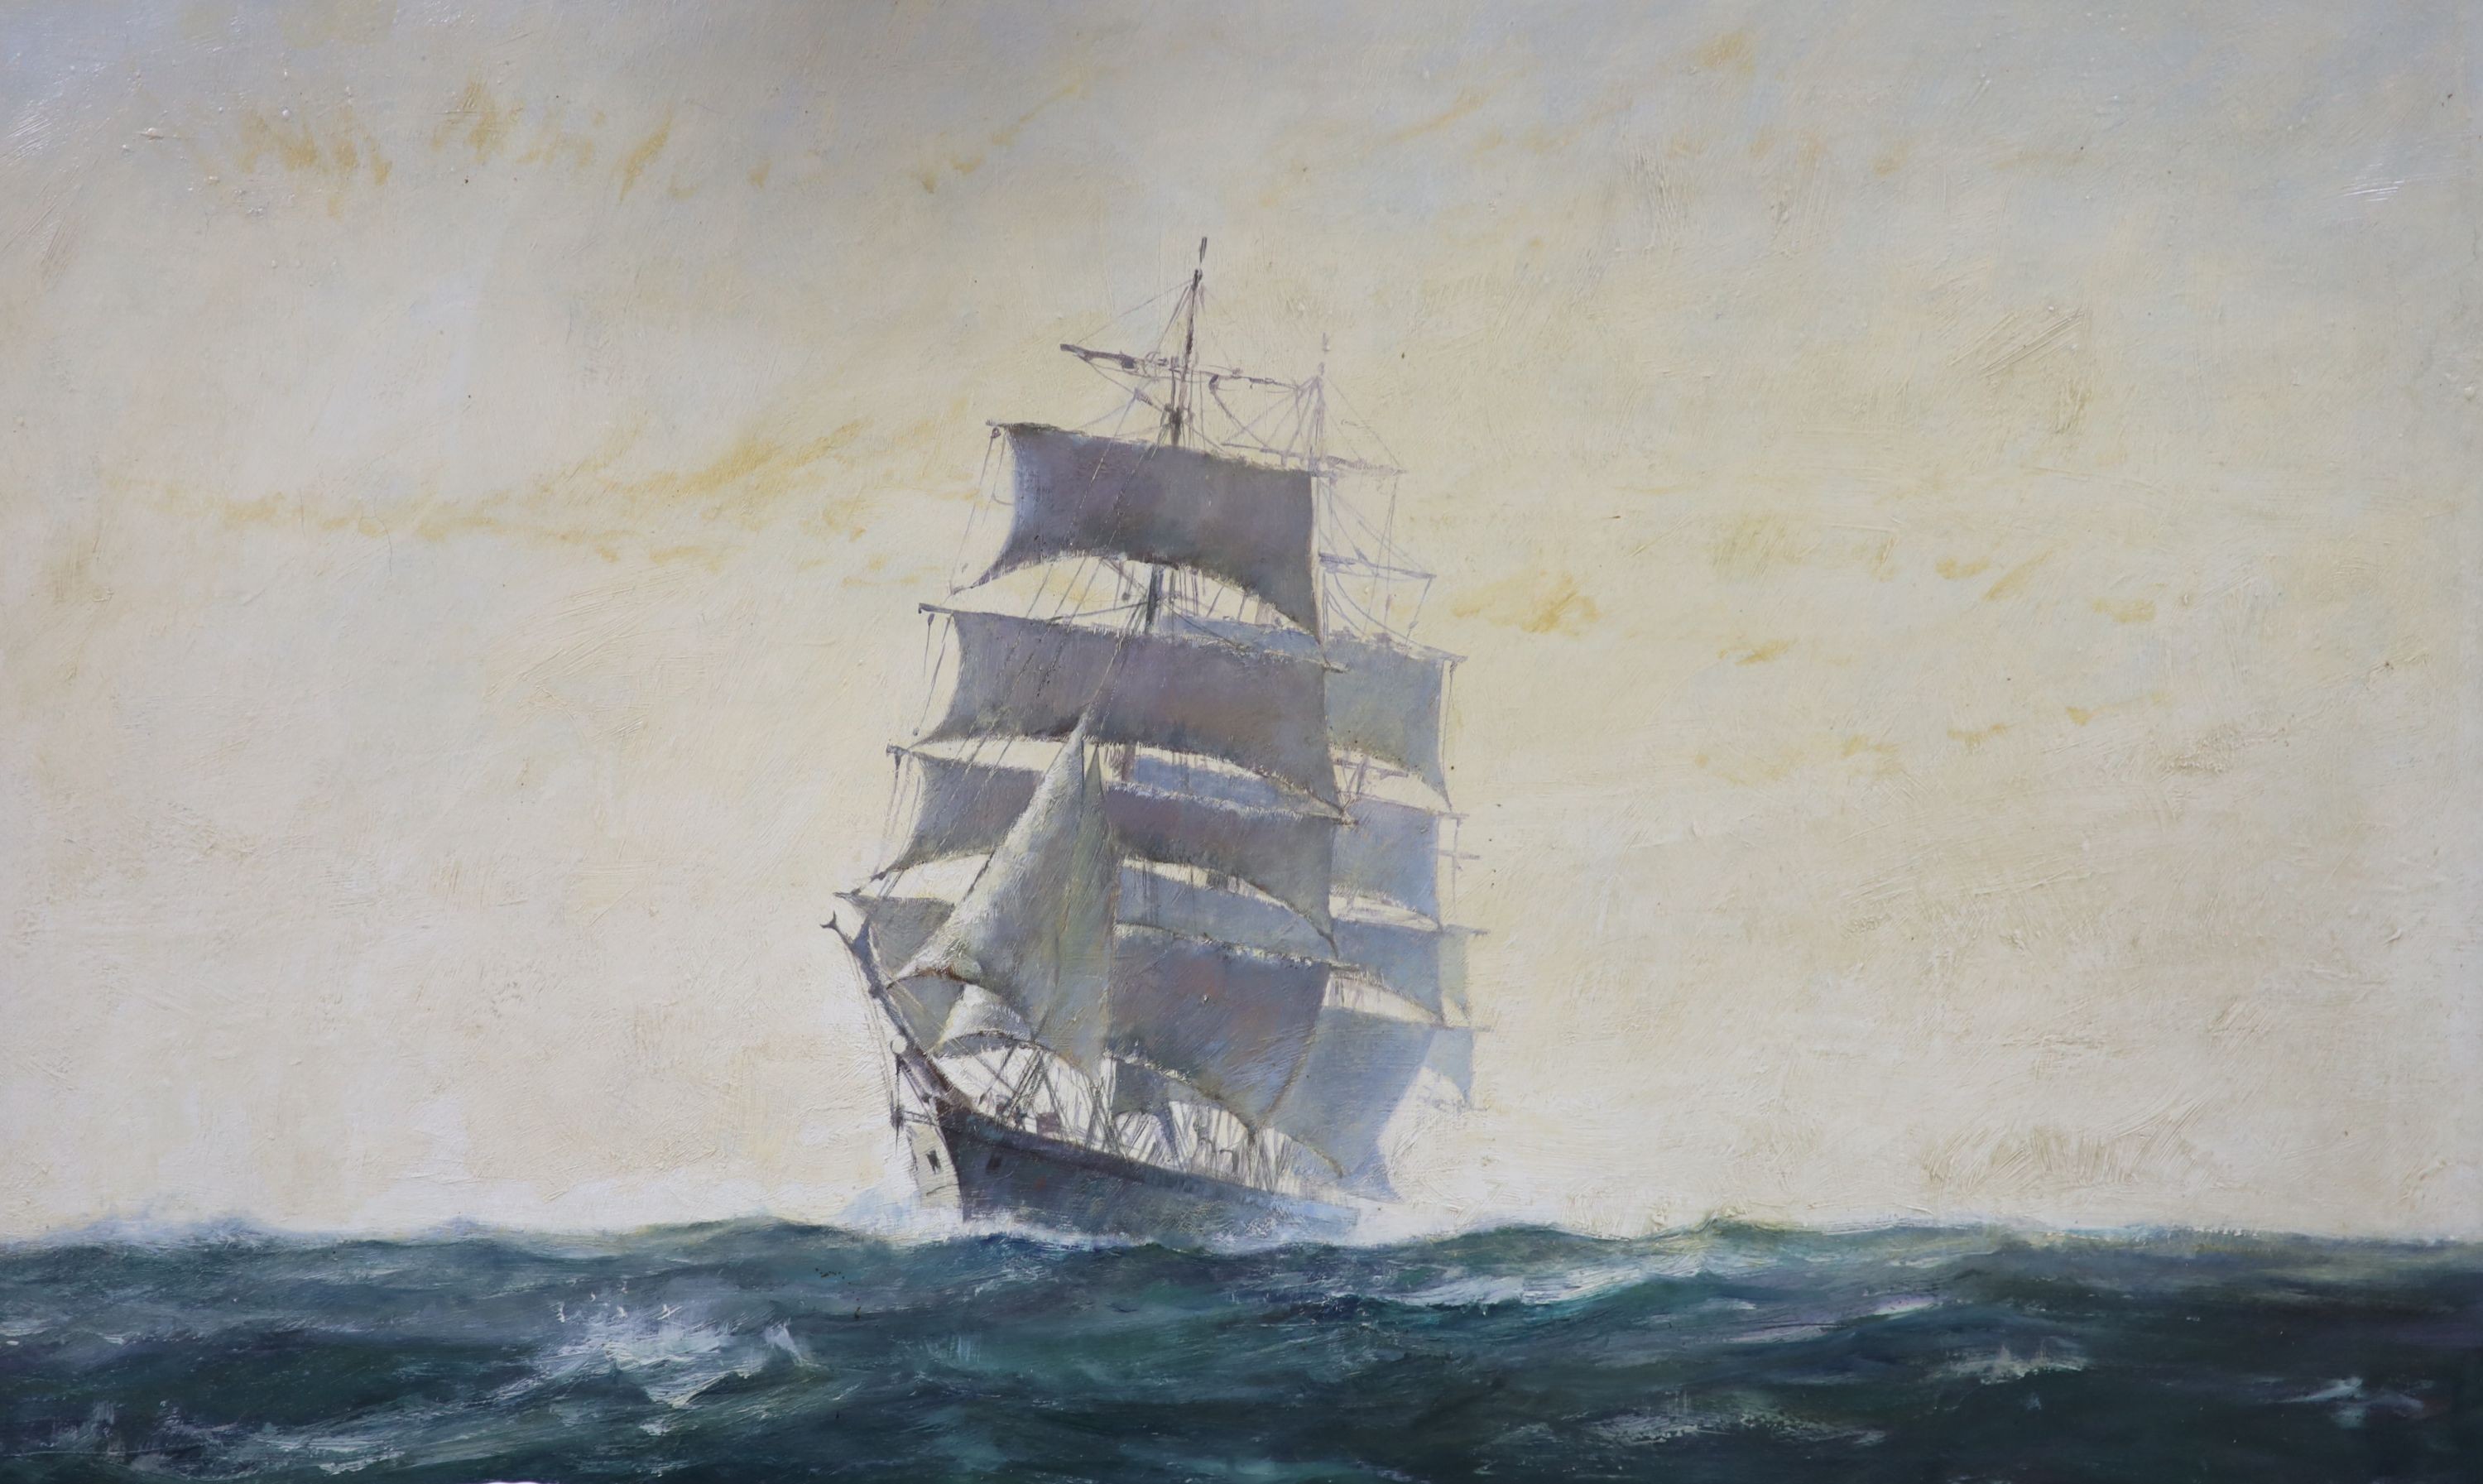 John Ross, oil on canvas clipper at sea, signed, 70 x 105cm.